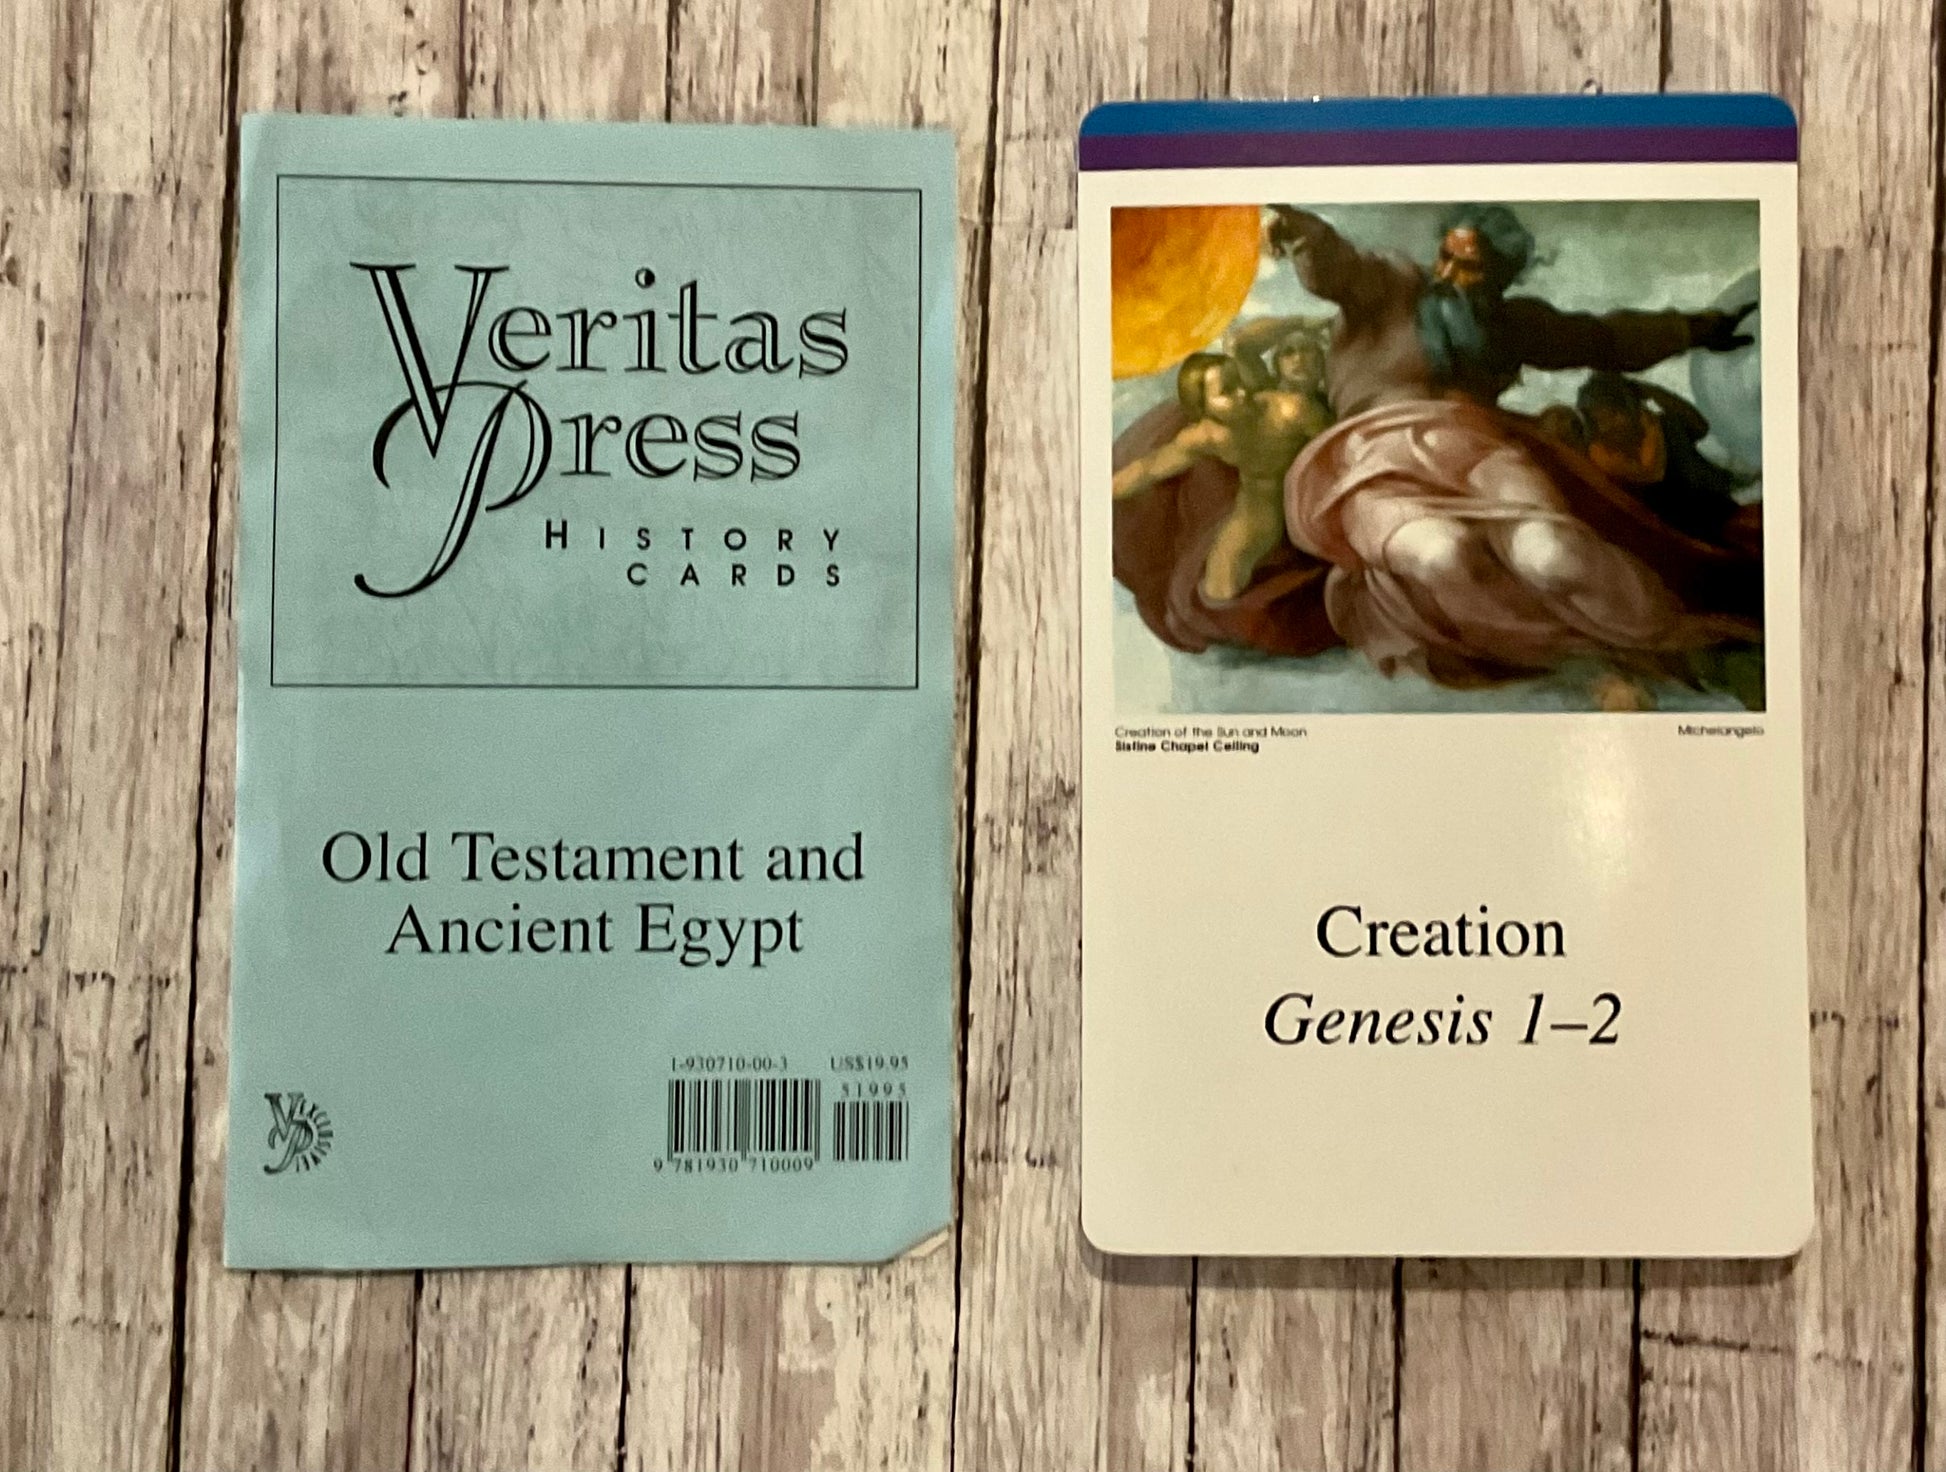 Veritas Press History Cards Old Testament and Ancient Egypt - Anchored Homeschool Resource Center